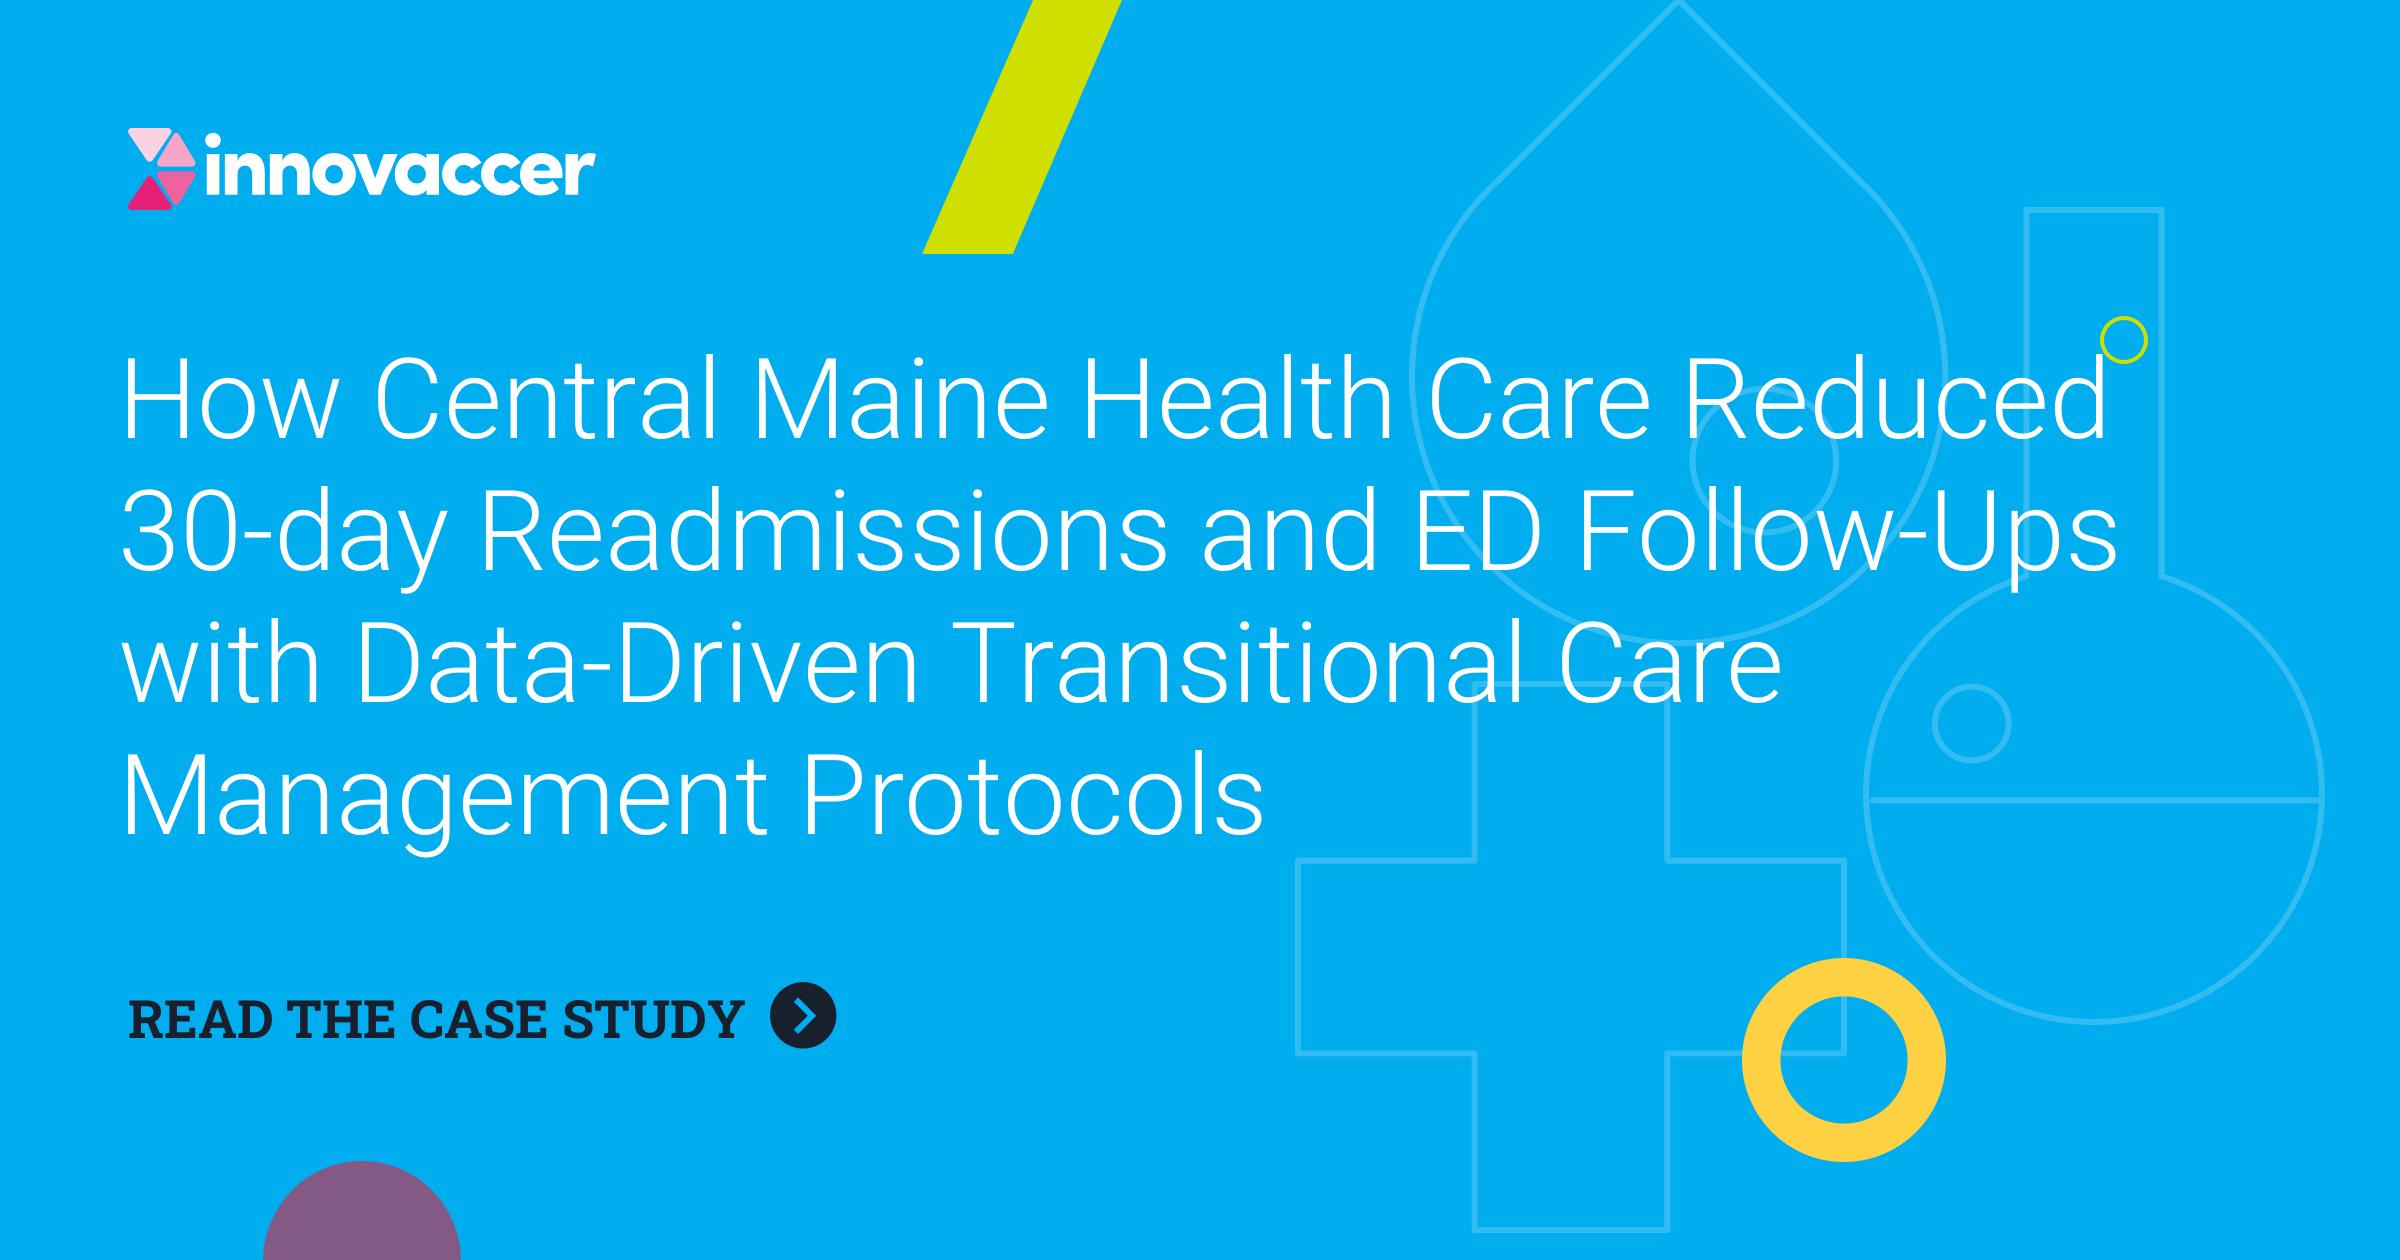 How Central Maine Health Care Reduced 30-day Readmissions and ED Follow-Ups with Data-Driven Transitional Care Management Protocols